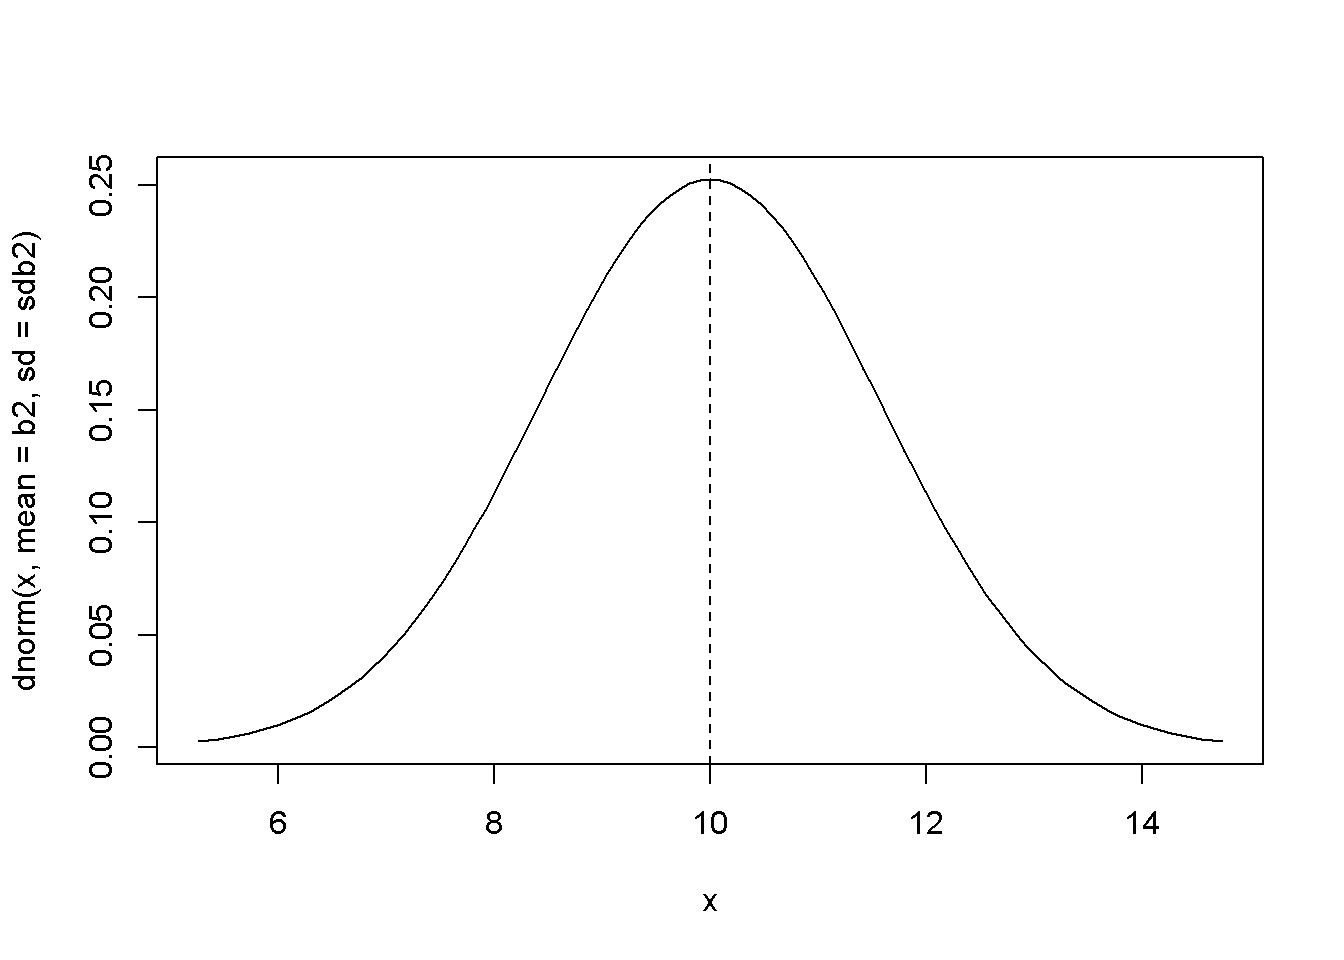 The theoretical (true) probability density function of $b_{2}$